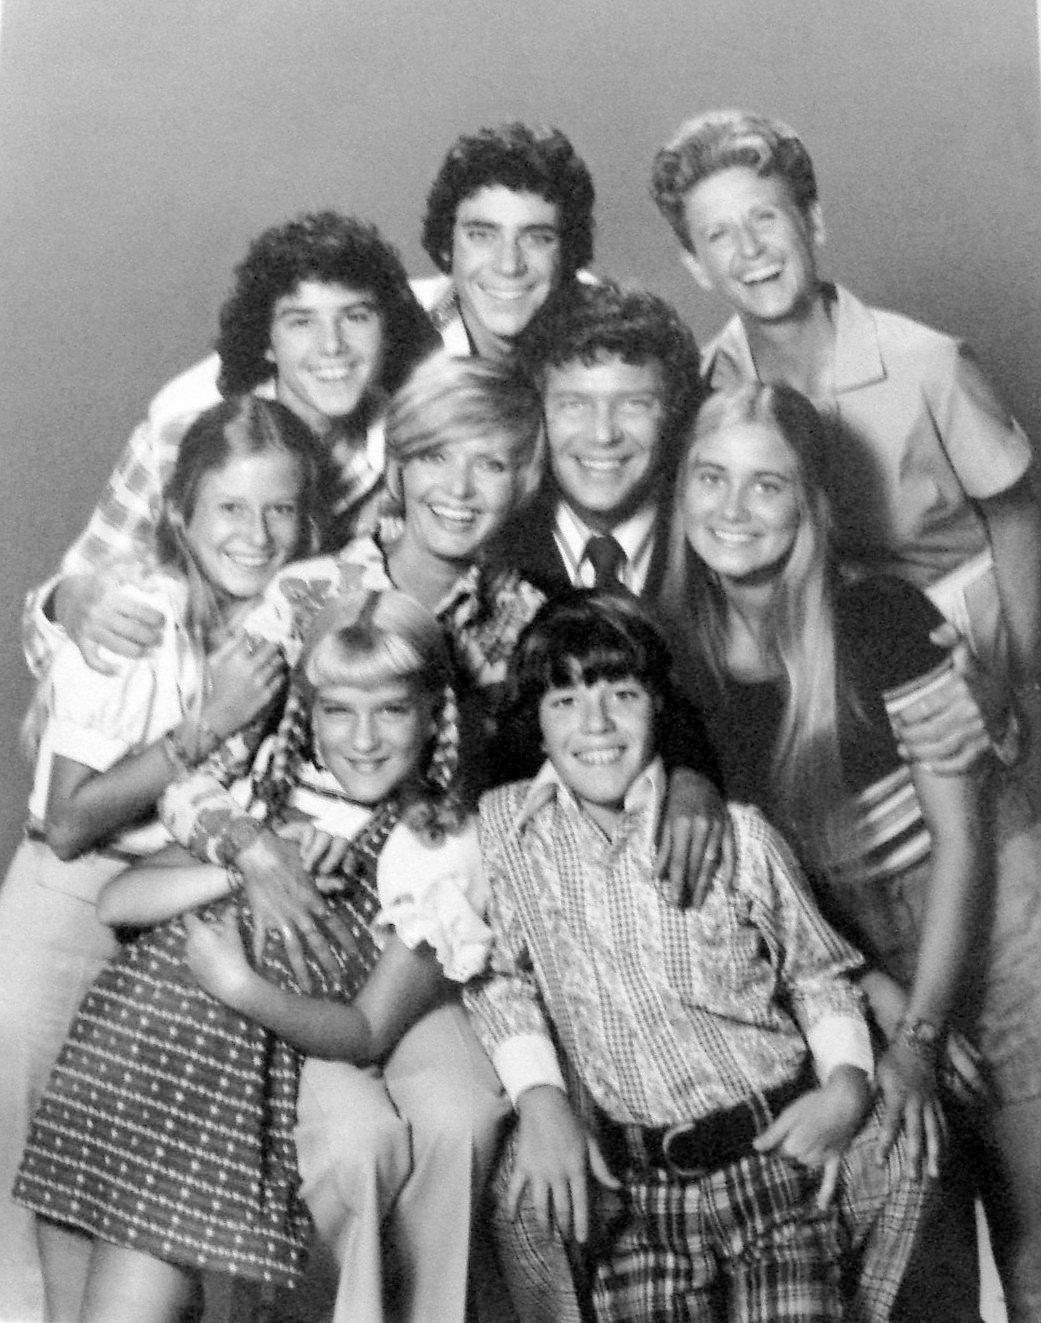 Cast photo from the television program "The Brady Bunch" | Photo: Wikimedia Commons